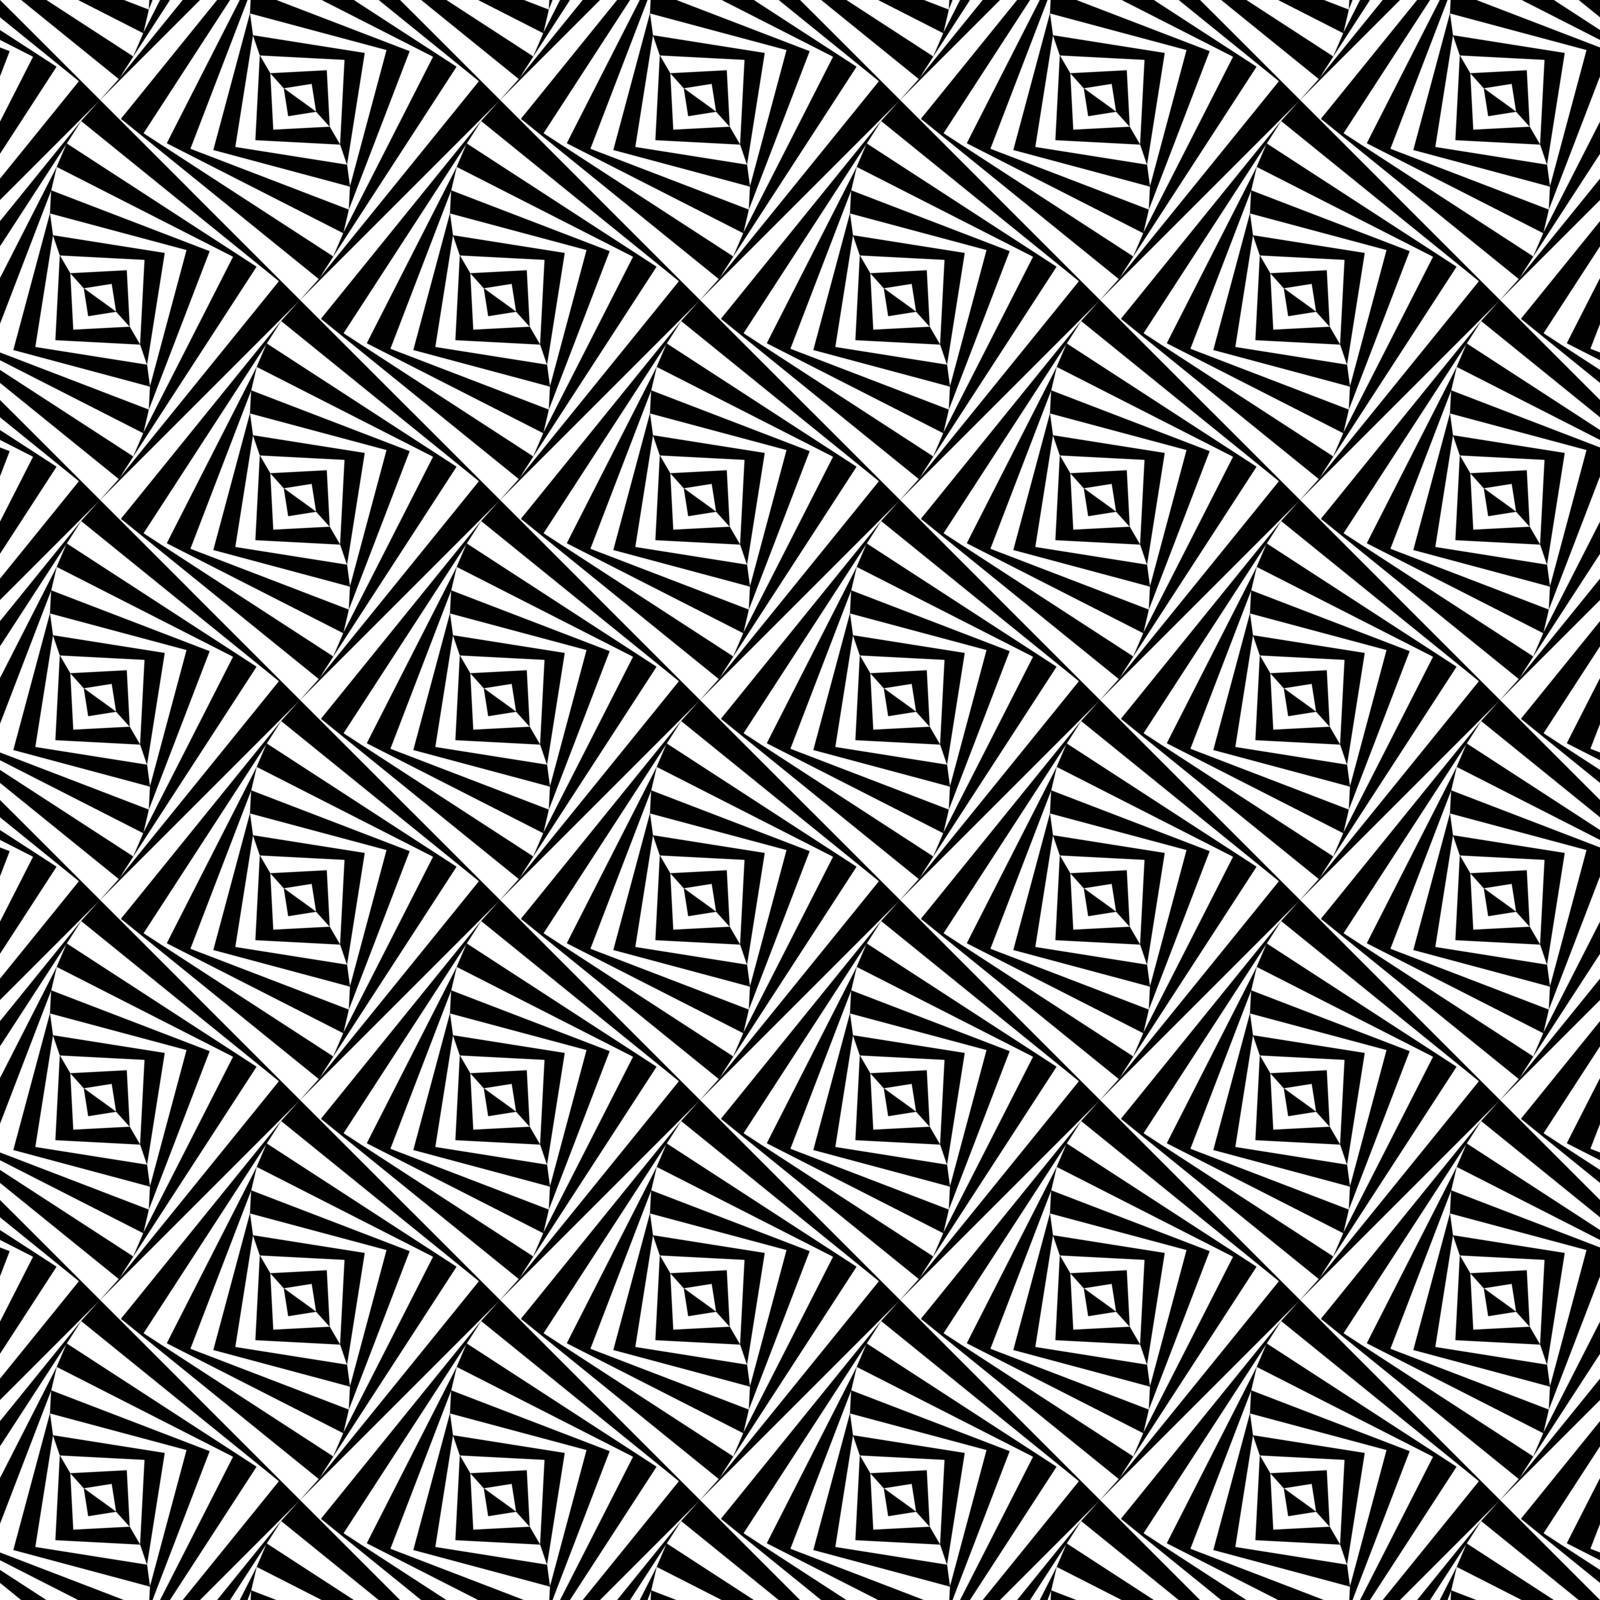 Seamless illustrated pattern - optical illusion - illustration appears to be moving